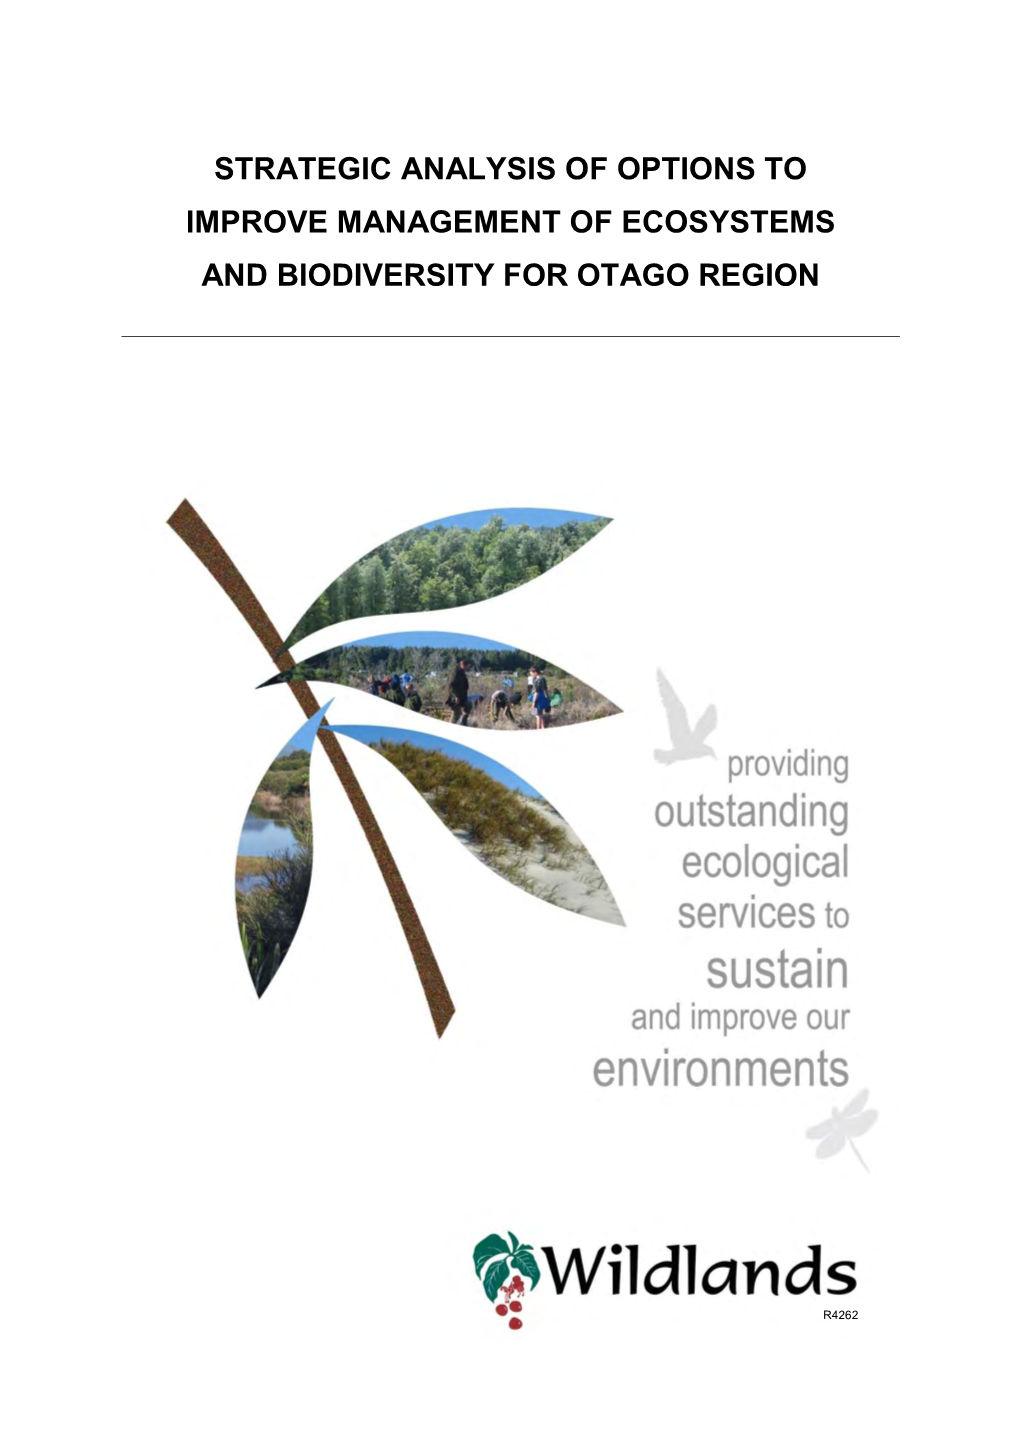 Strategic Analysis of Options to Improve Management of Ecosystems and Biodiversity for Otago Region